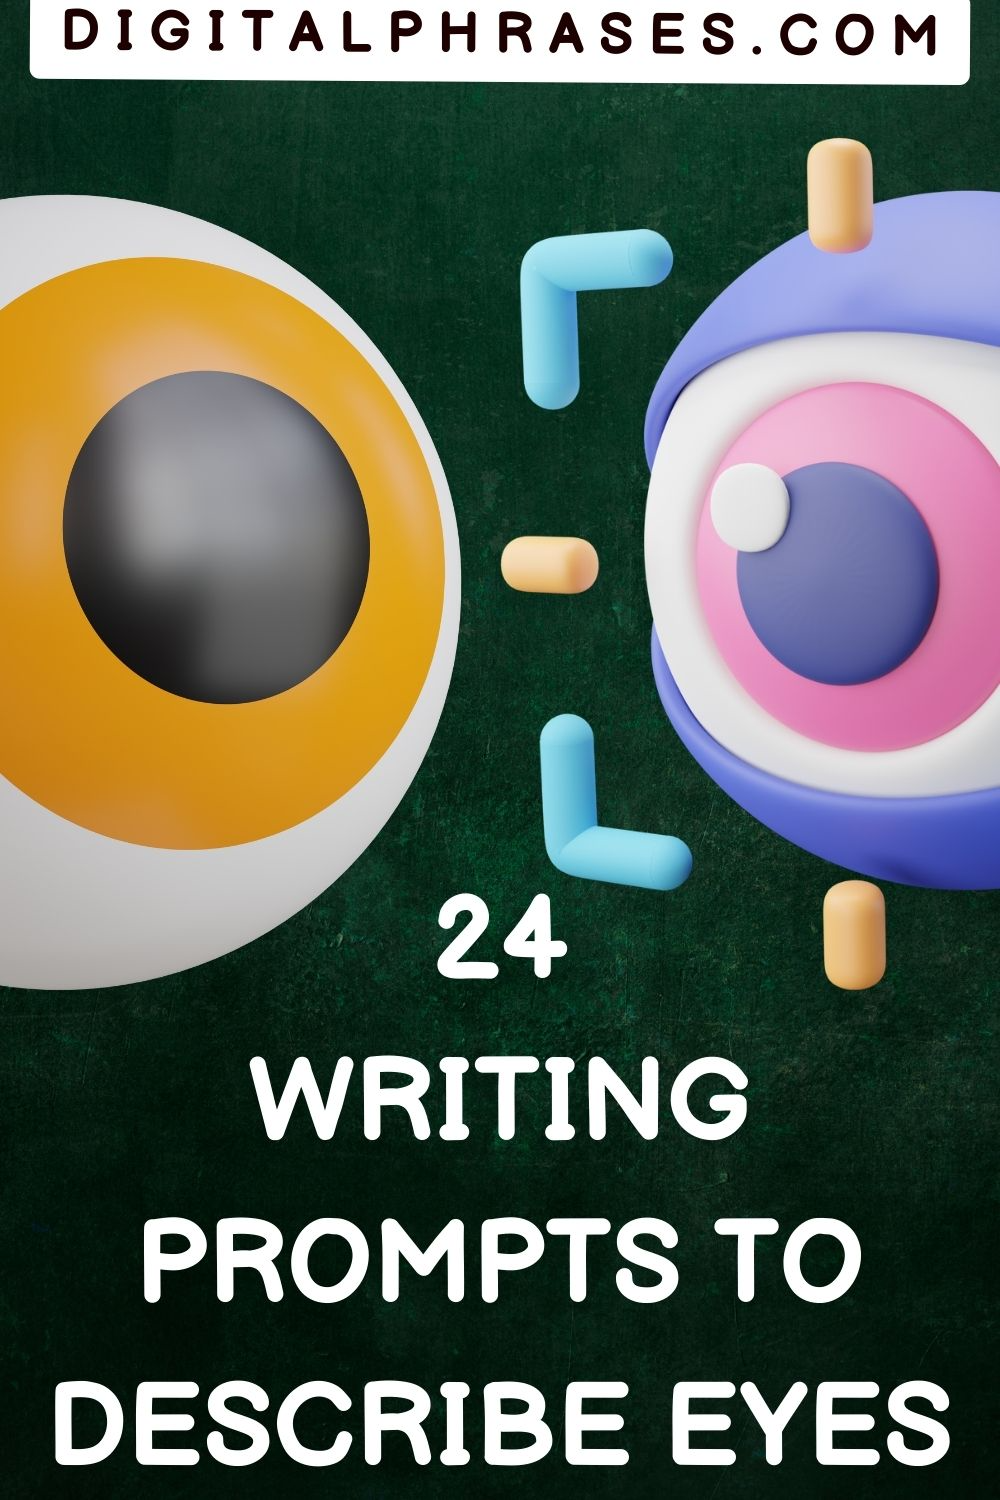 green background image with text - 24 Writing Prompts To Describe Eyes